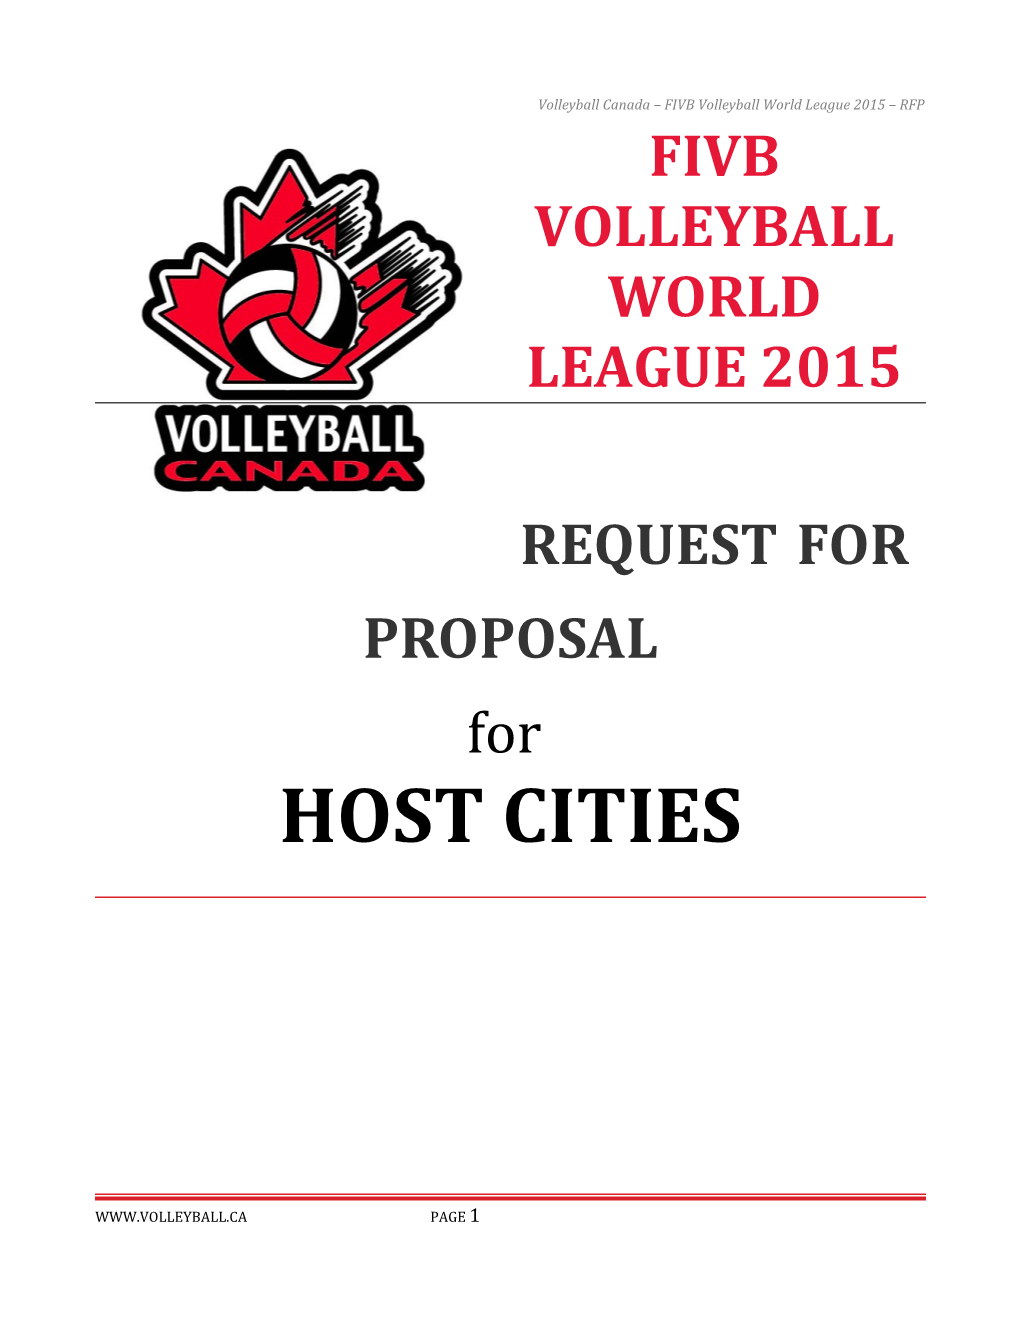 Volleyball Canada FIVB Volleyball World League 2015 RFP